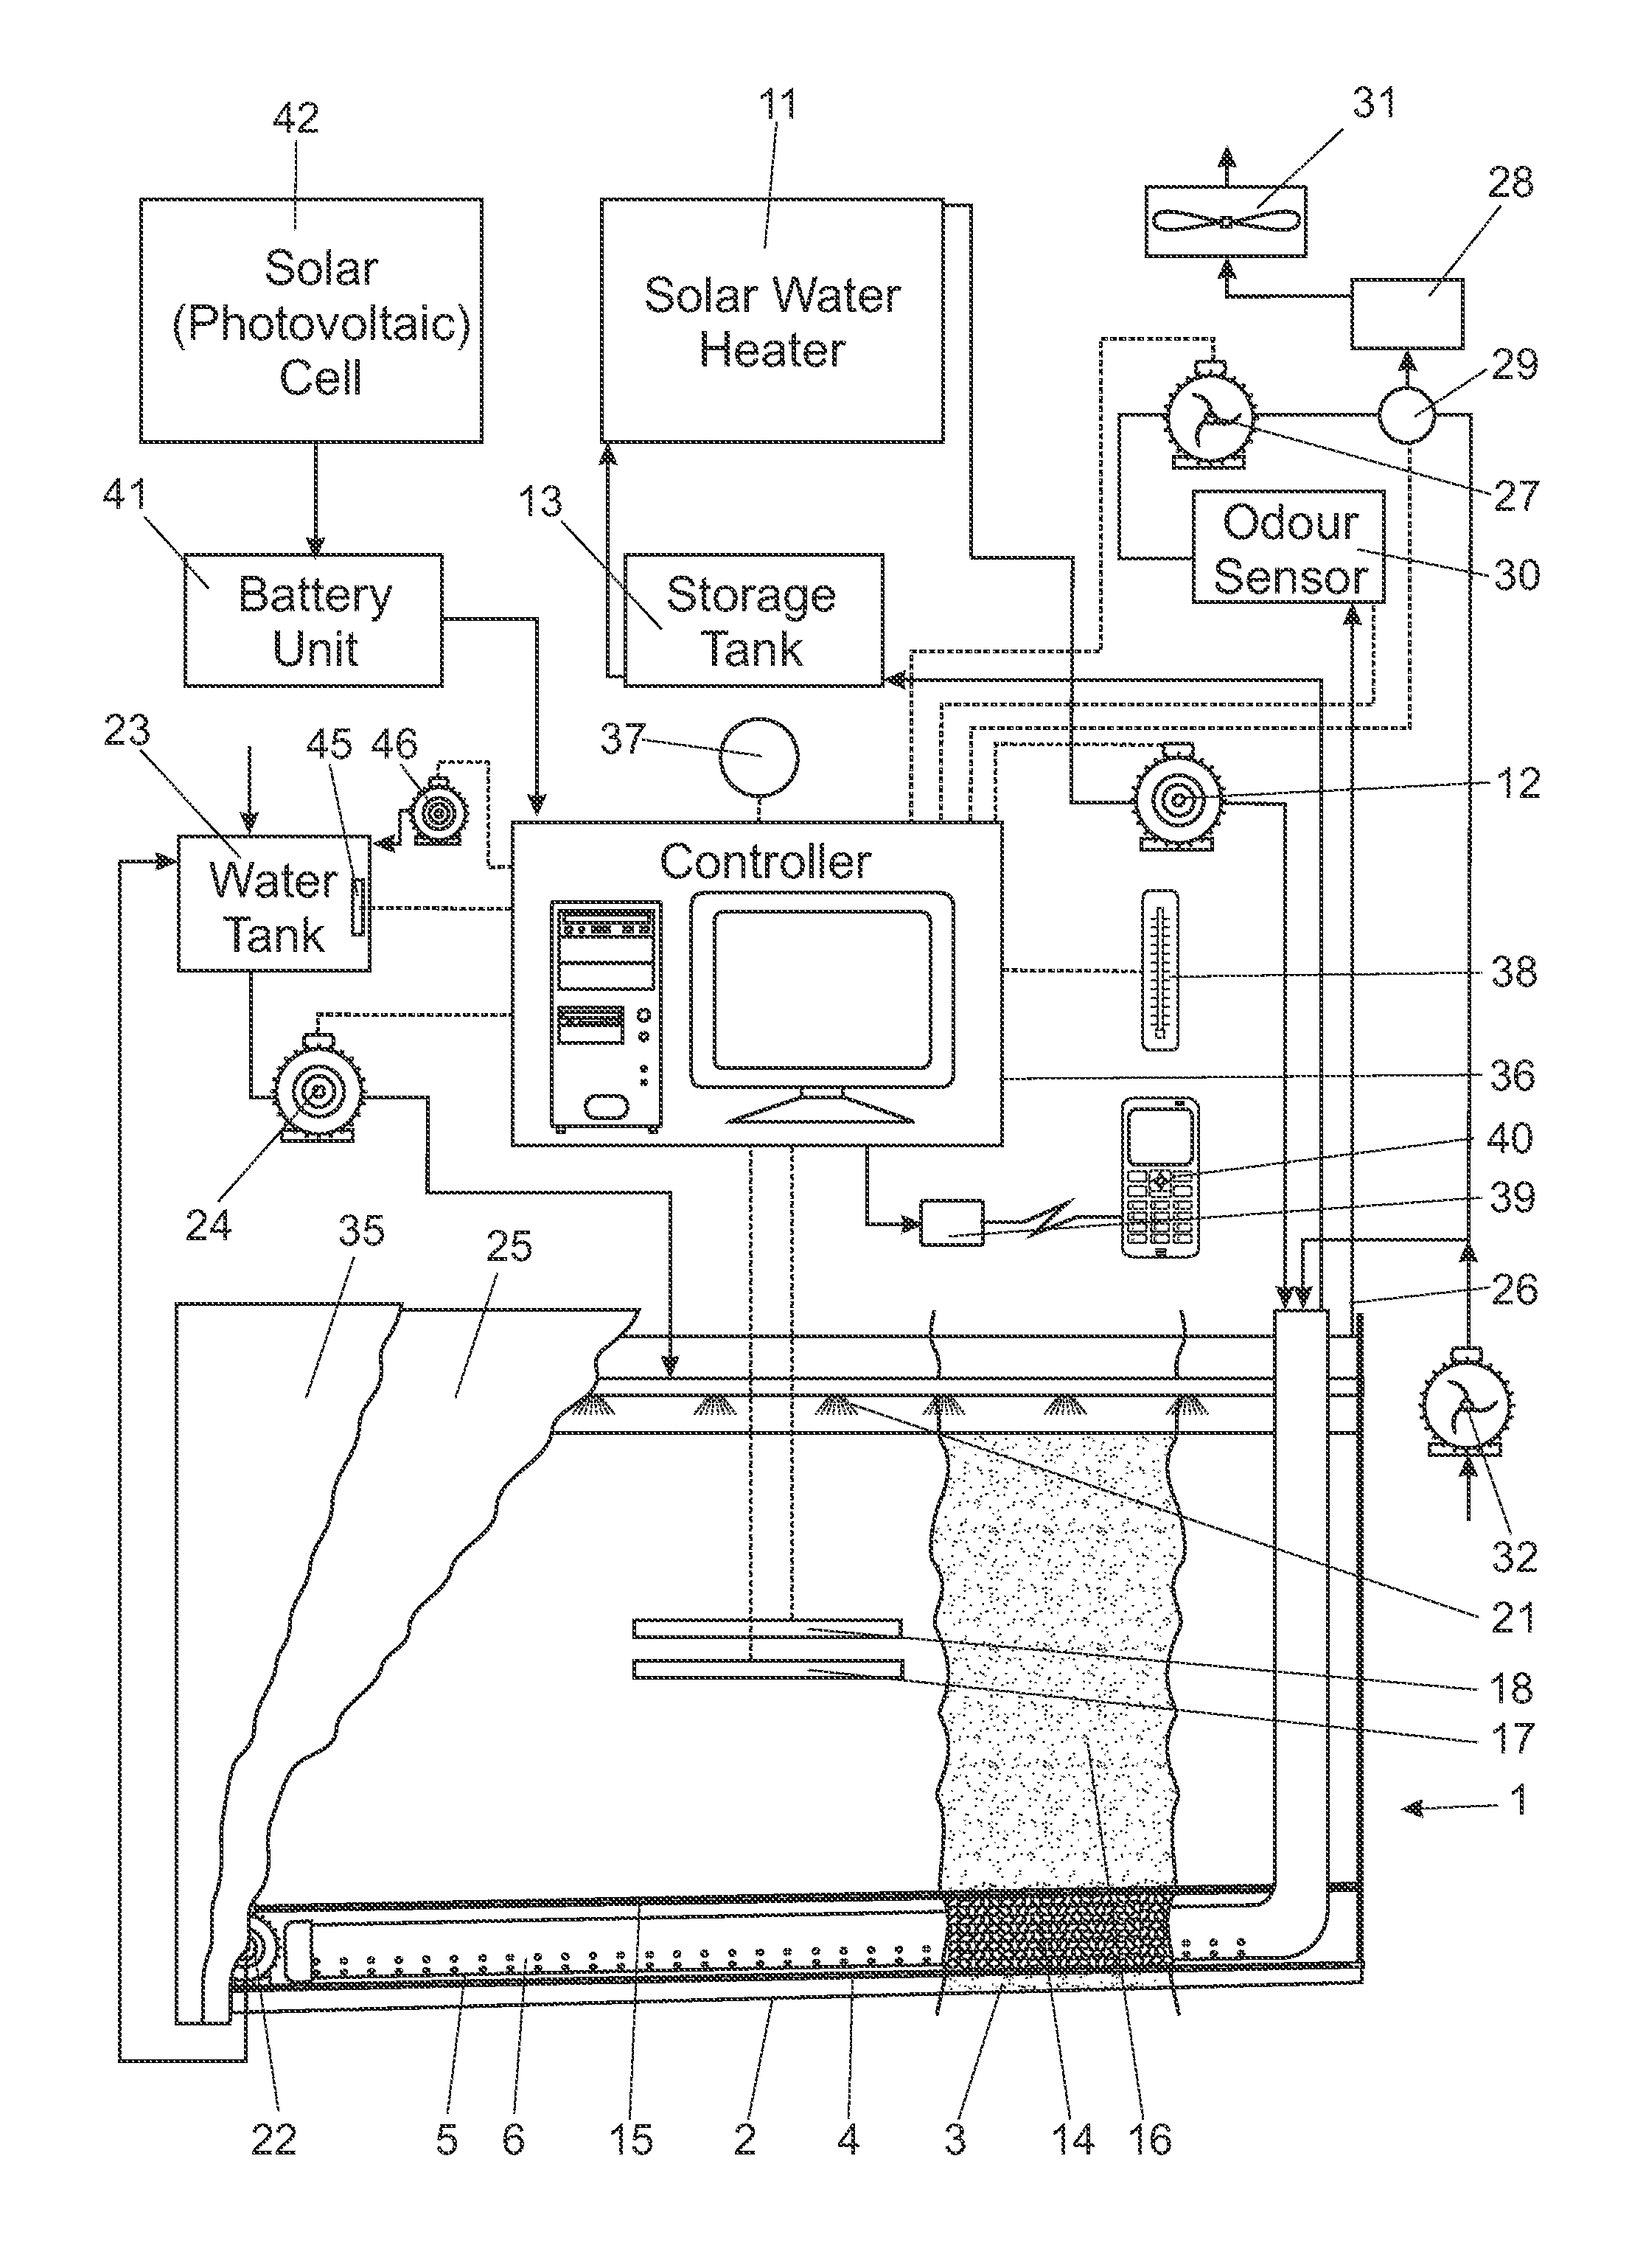 Apparatus and Method for Conducting Microbiological Processes